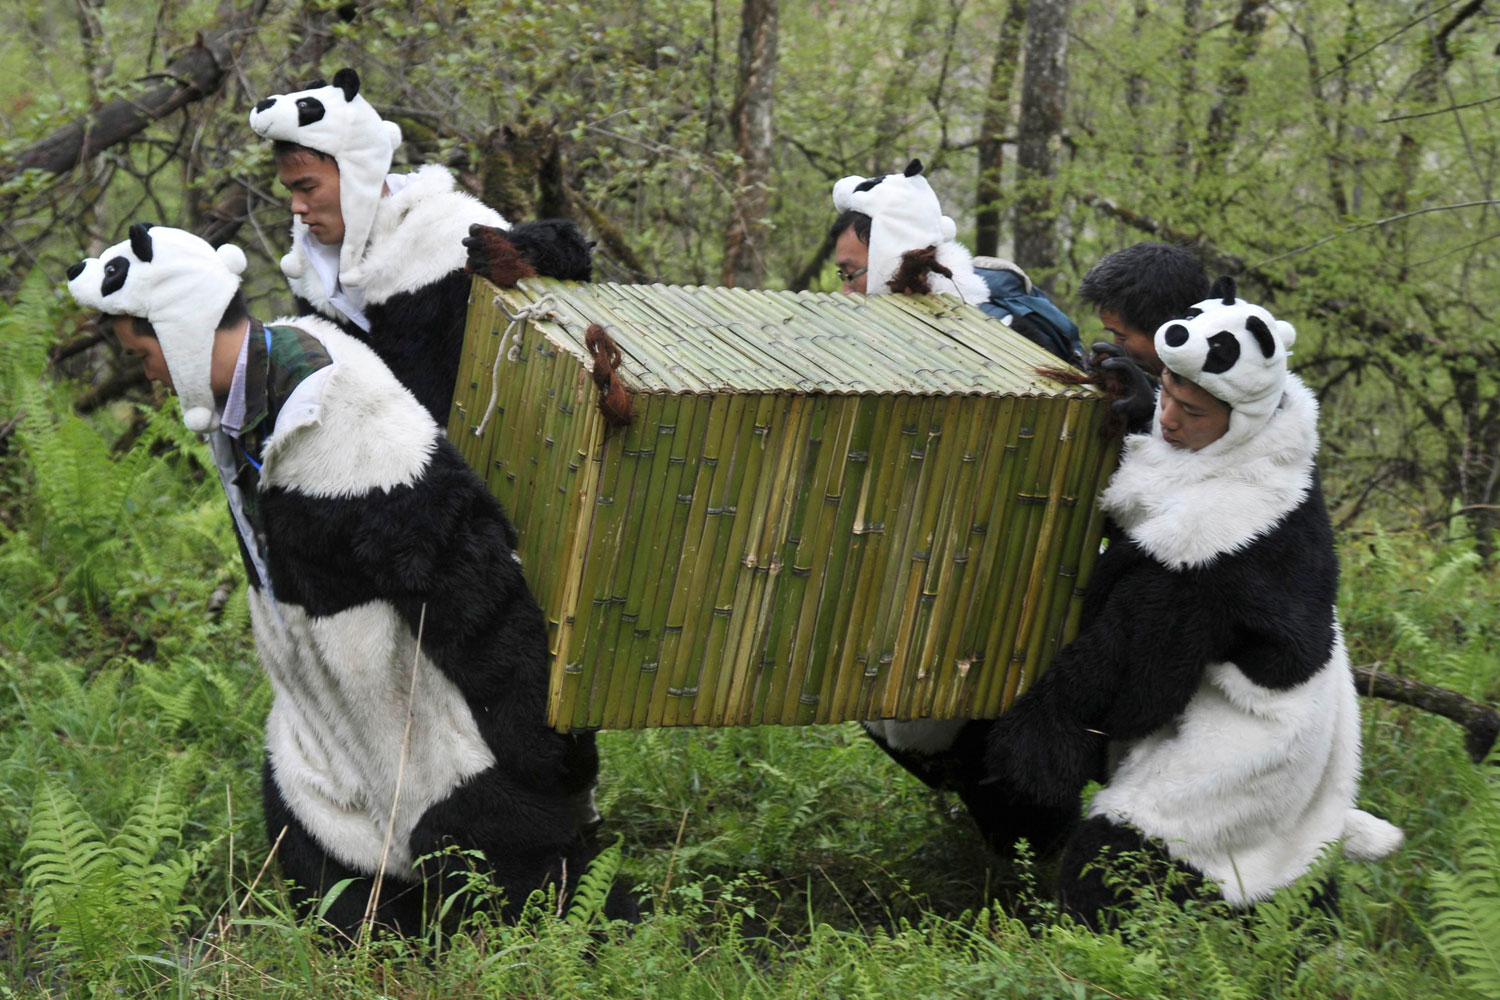 May 3, 2012. Researchers dressed in panda costumes carry a cage as they transfer giant panda Tao Tao to a new living environment at the Hetaoping Research and Conservation Center for the Giant Panda in Wolong National Nature Reserve, Sichuan province, China.